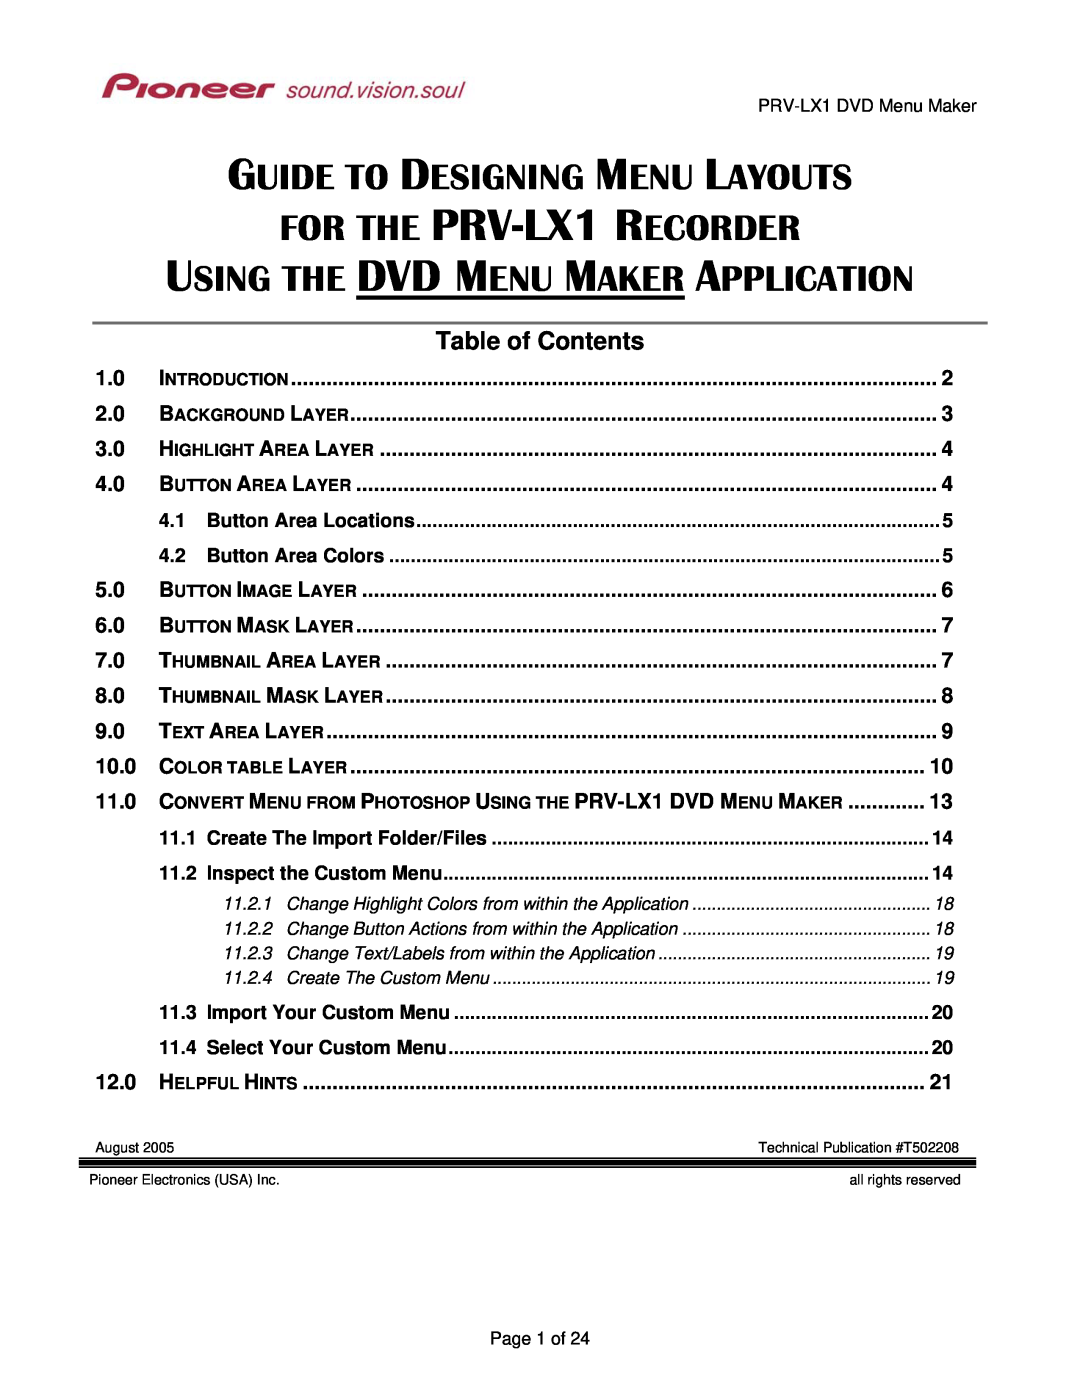 Pioneer PRV-LX1 operating instructions Pib #, Overview, created GC/MD/JB on 1 April, Page 1 of, Prod Mgmt / Sales Eng 